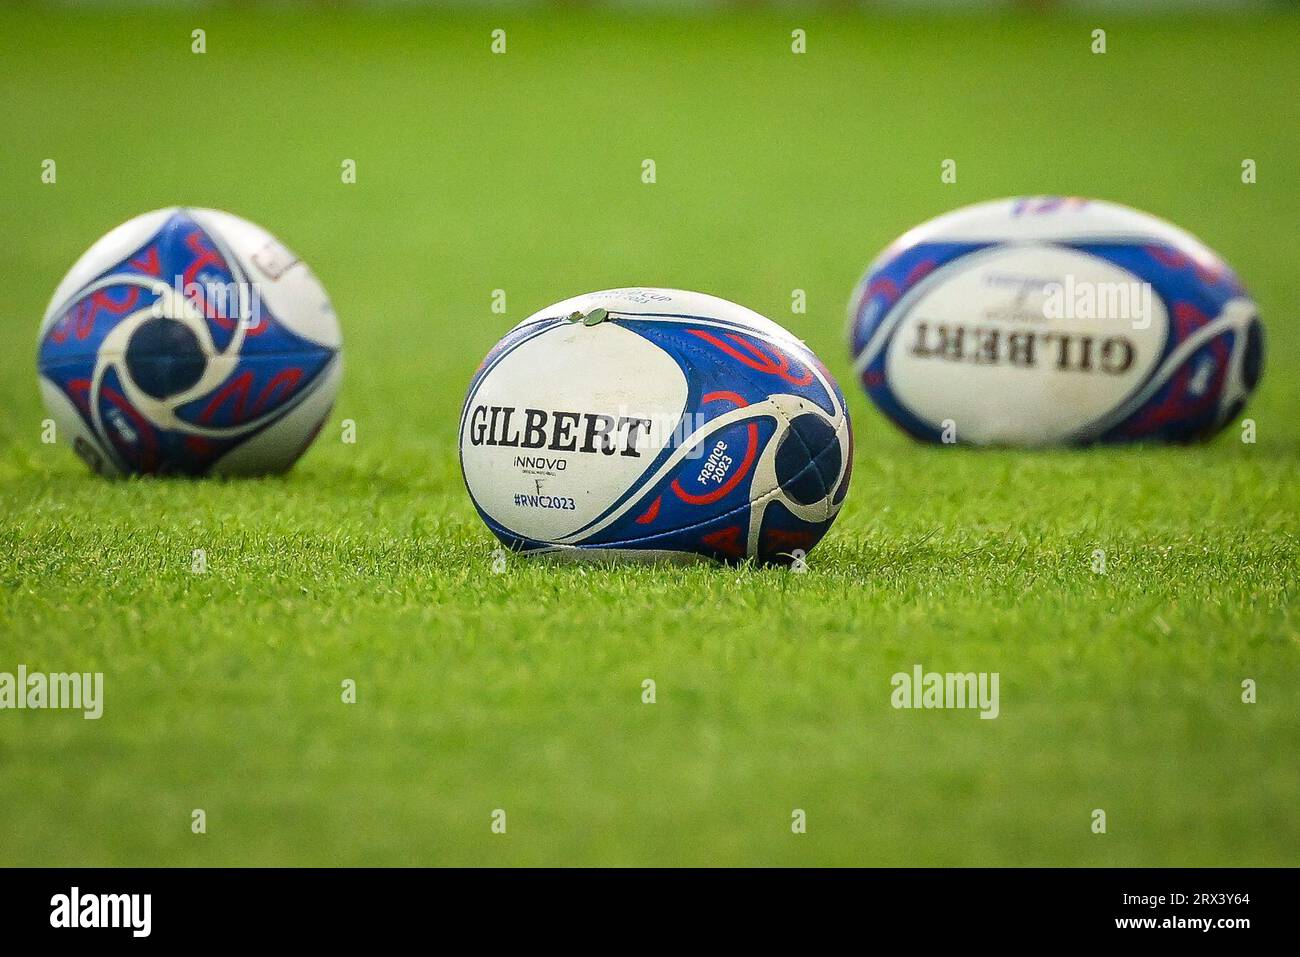 Illustration of the Gilbert match balls during the World Cup 2023, Pool A rugby union match between France and Uruguay on September 14, 2023 at Pierre Mauroy stadium in Villeneuve-d'Ascq near Lille, France - Photo Matthieu Mirville/DPPI Credit: DPPI Media/Alamy Live News Stock Photo